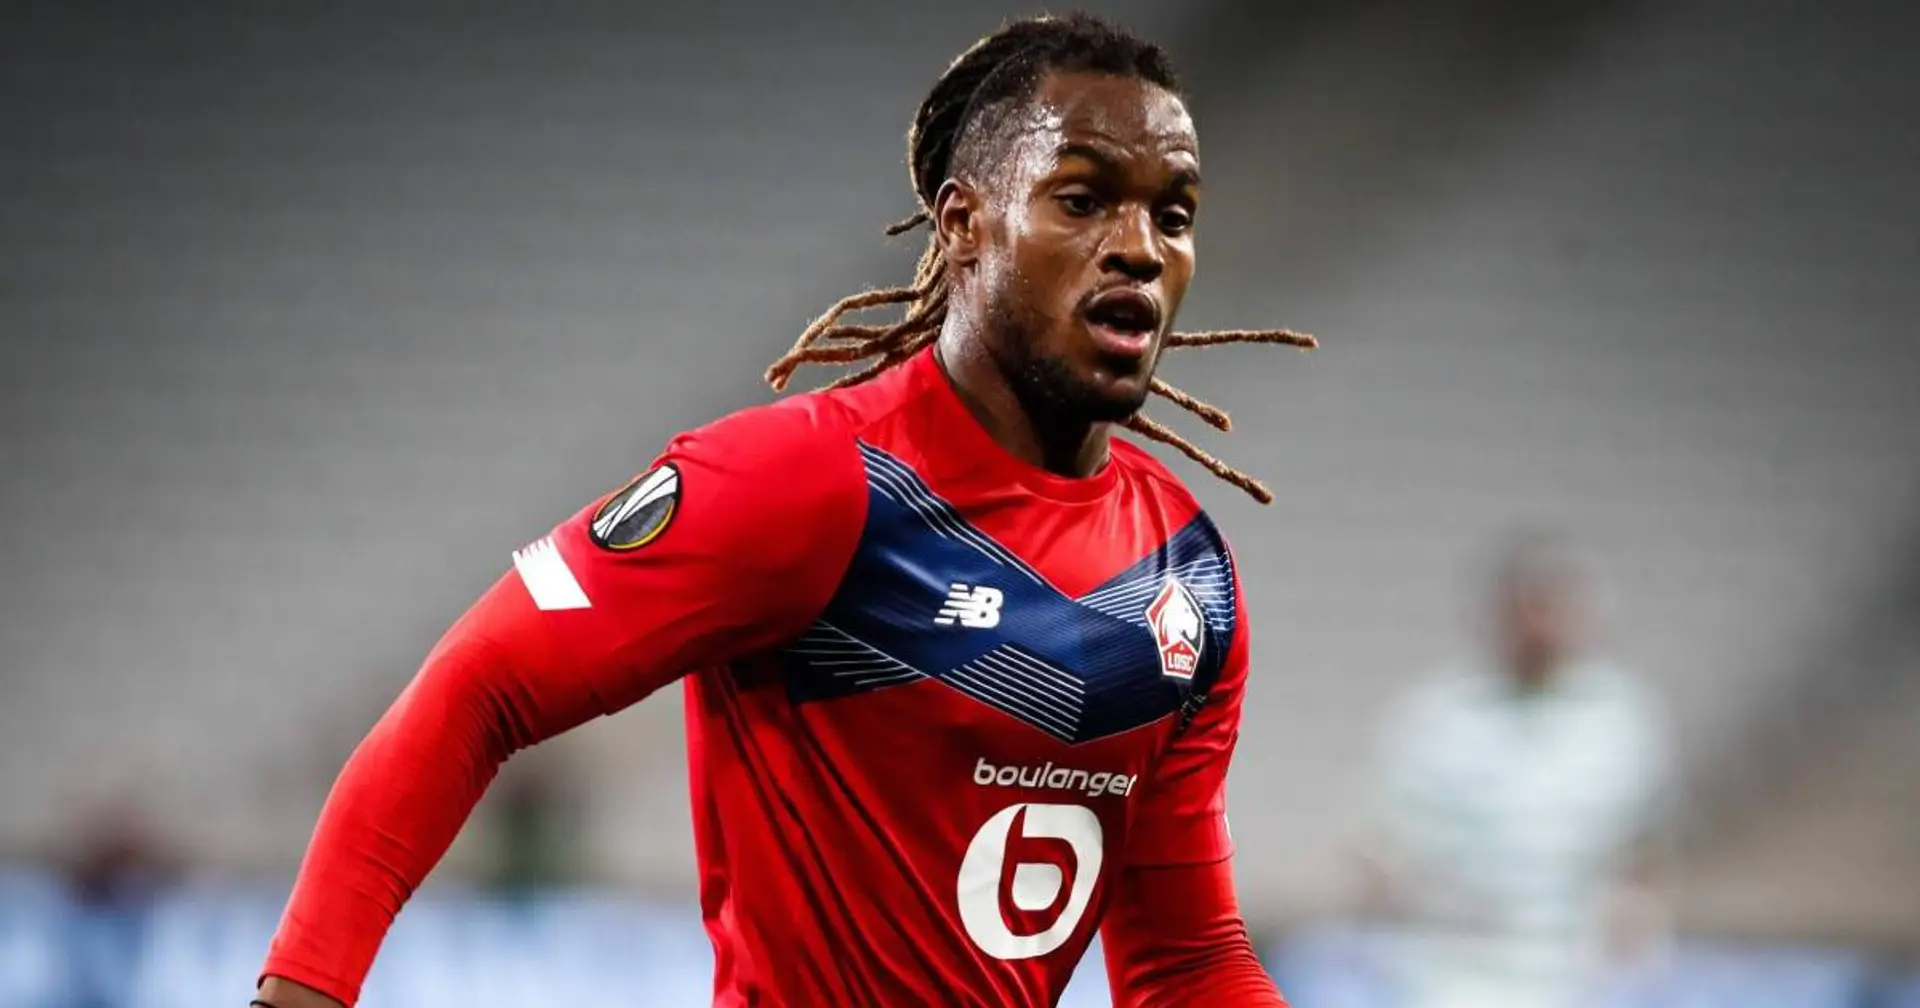 Barca currently not considering signing Renato Sanches (reliability: 5 stars)